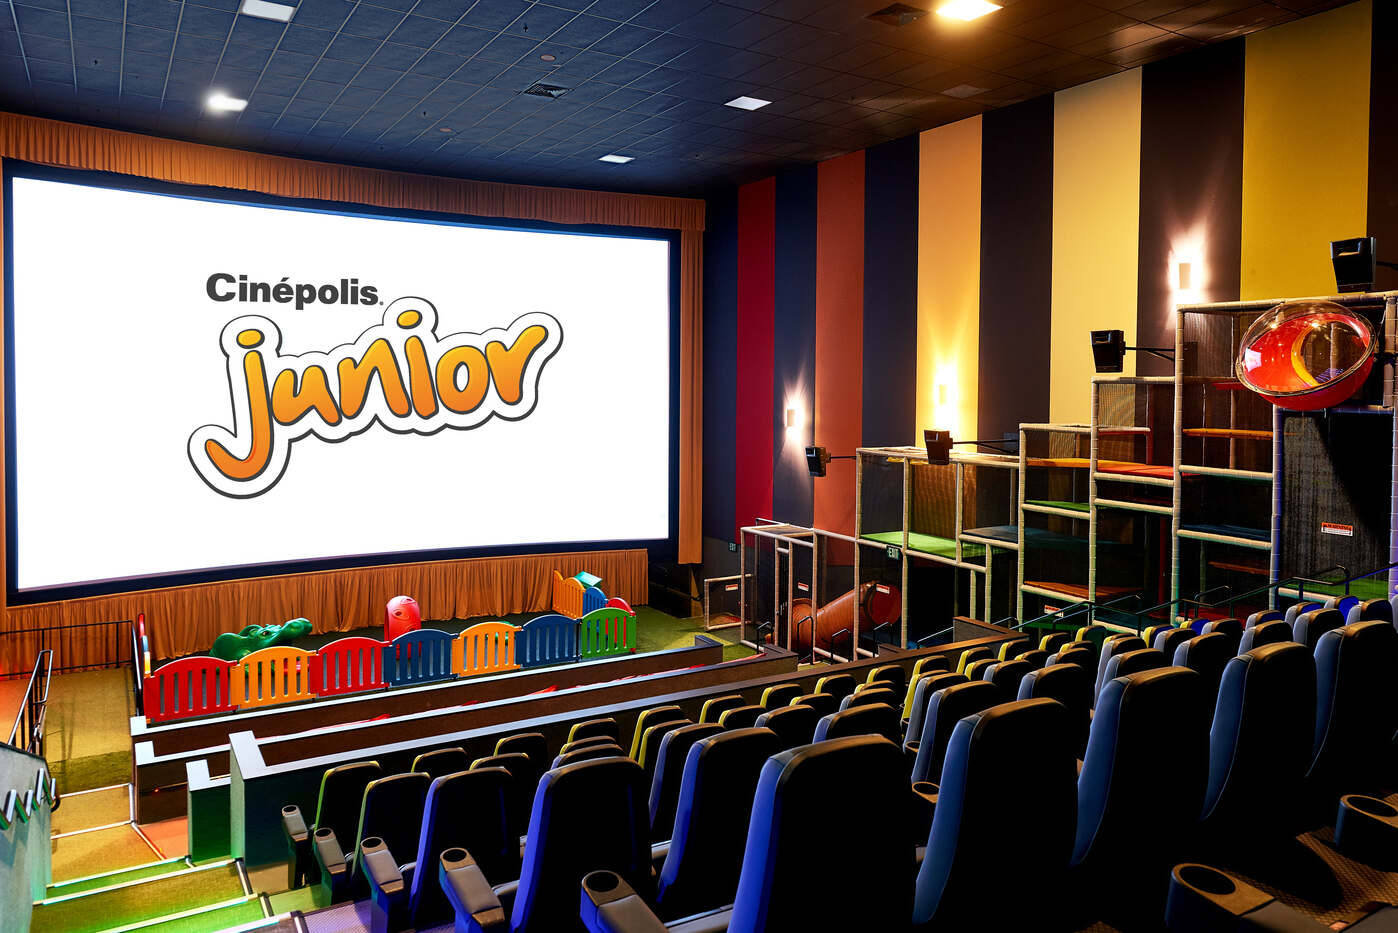 Movie theater for kids